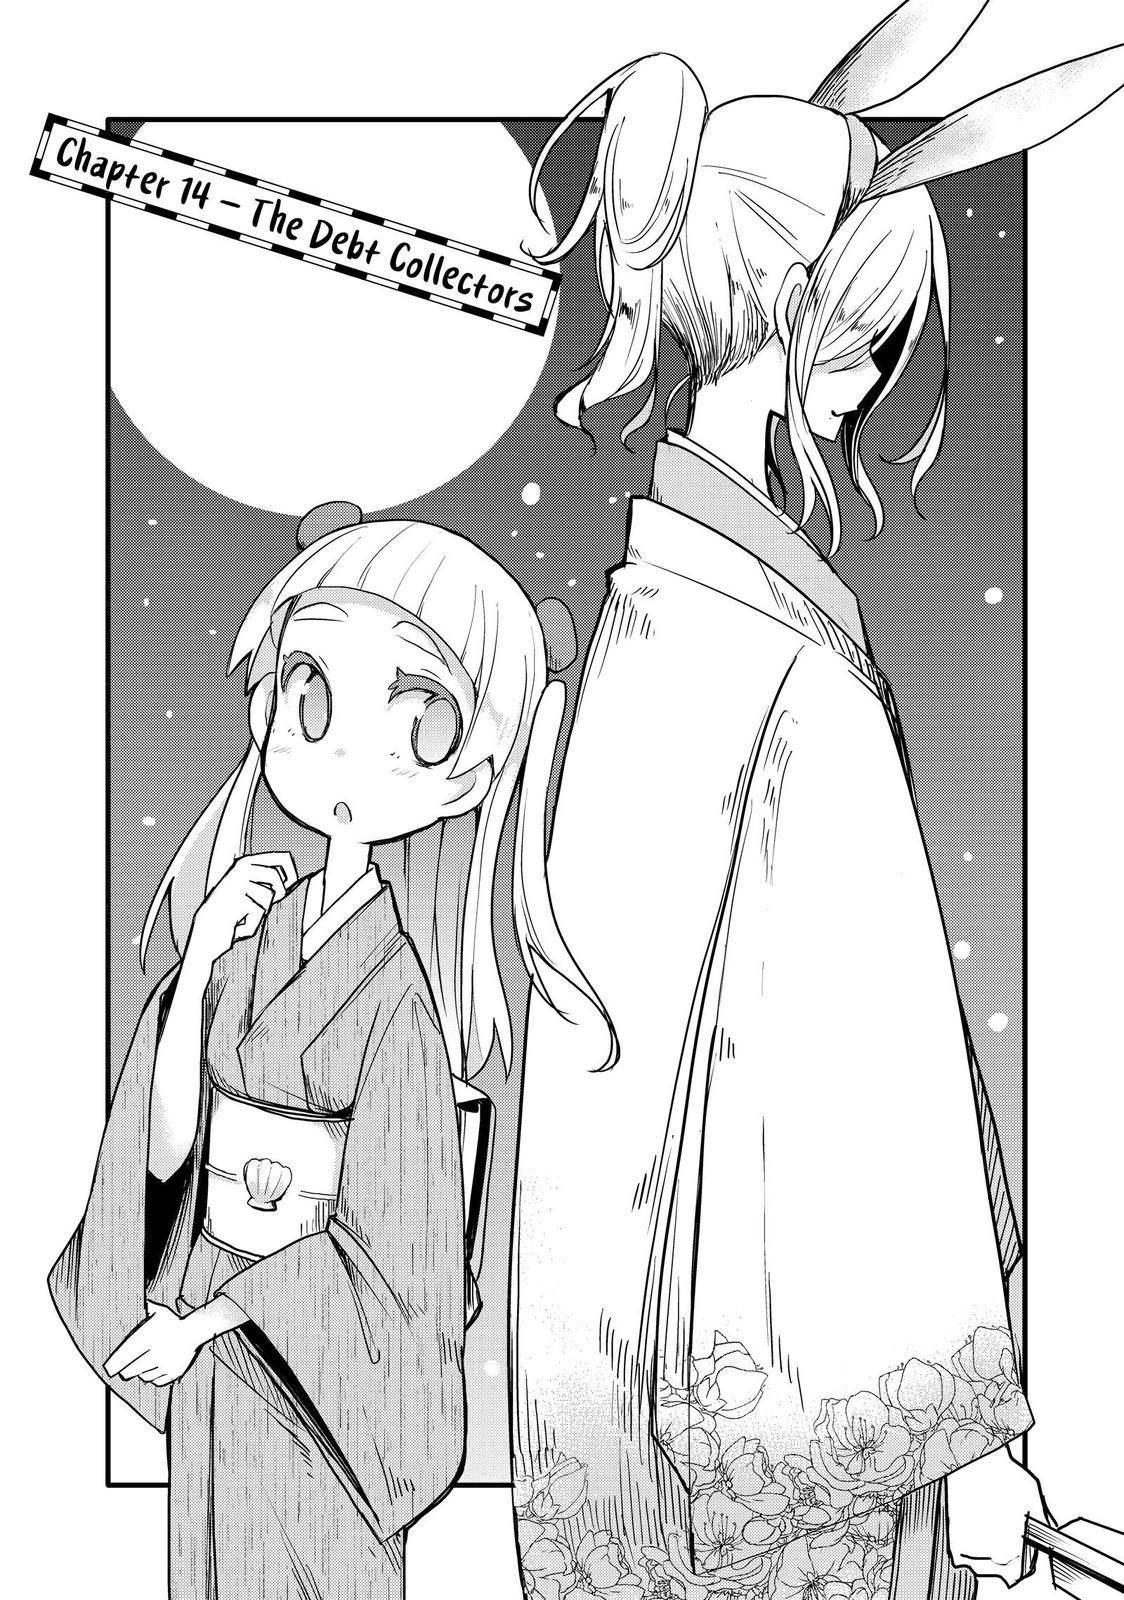 My Master Has No Tail - chapter 14 - #1